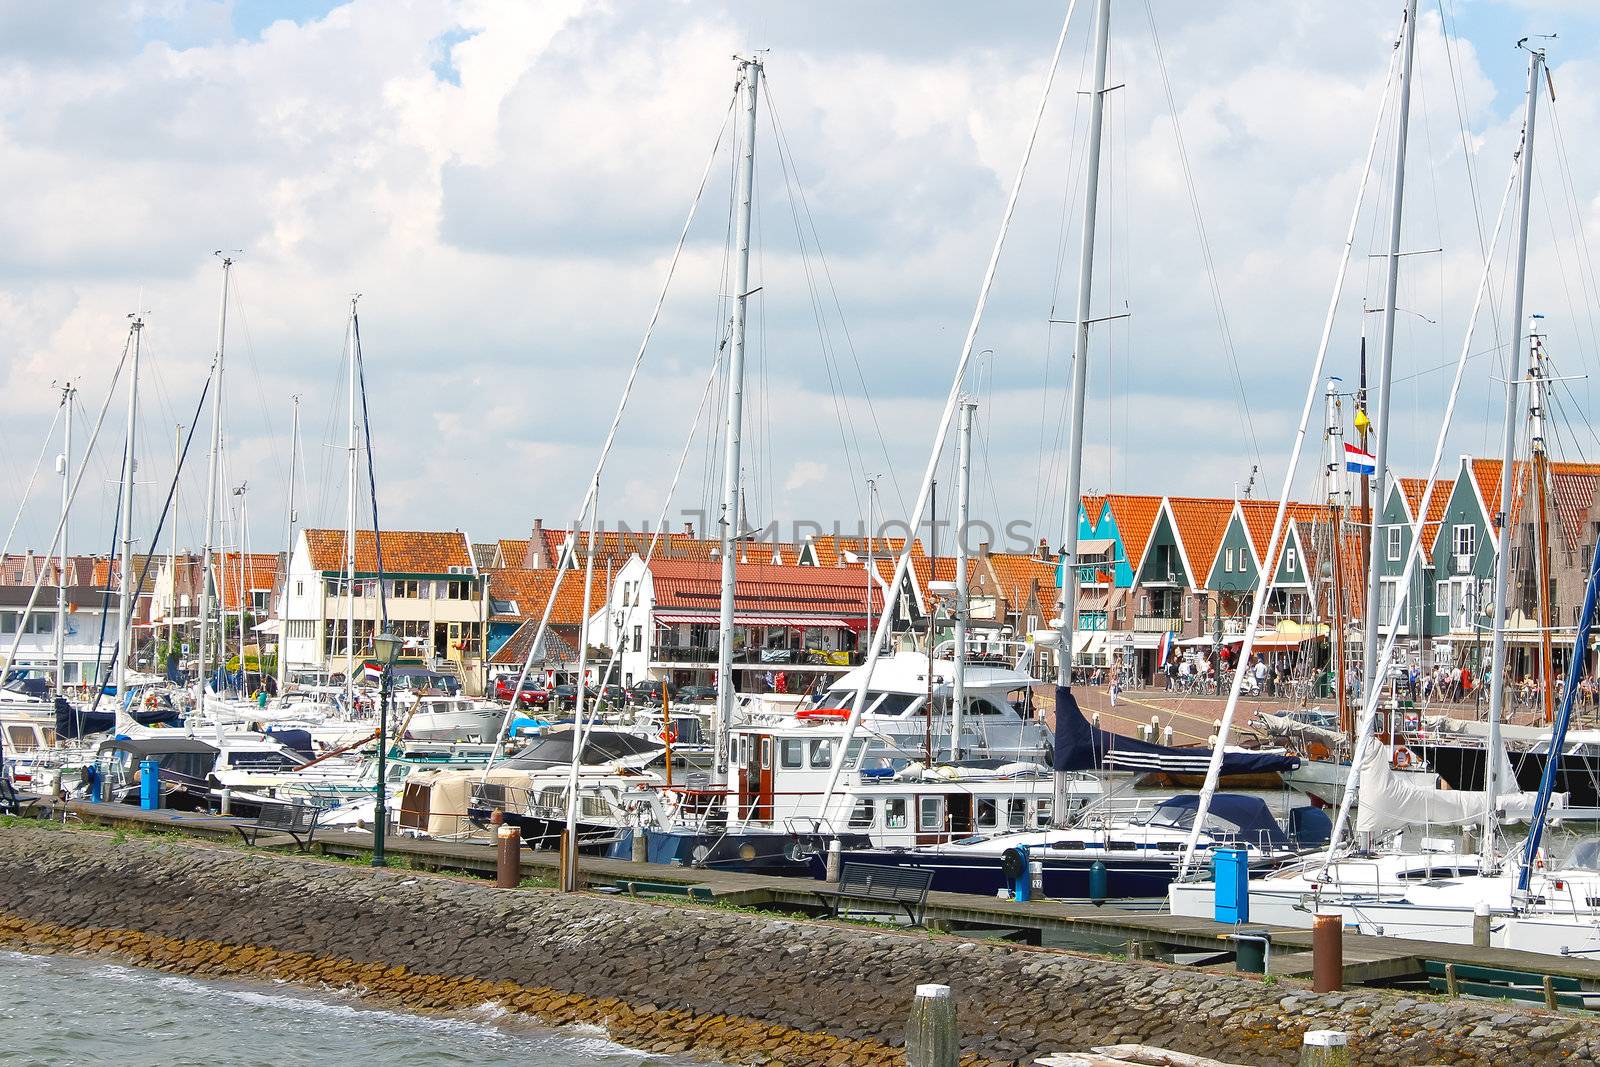 Ships in the port of Volendam. Netherlands  by NickNick